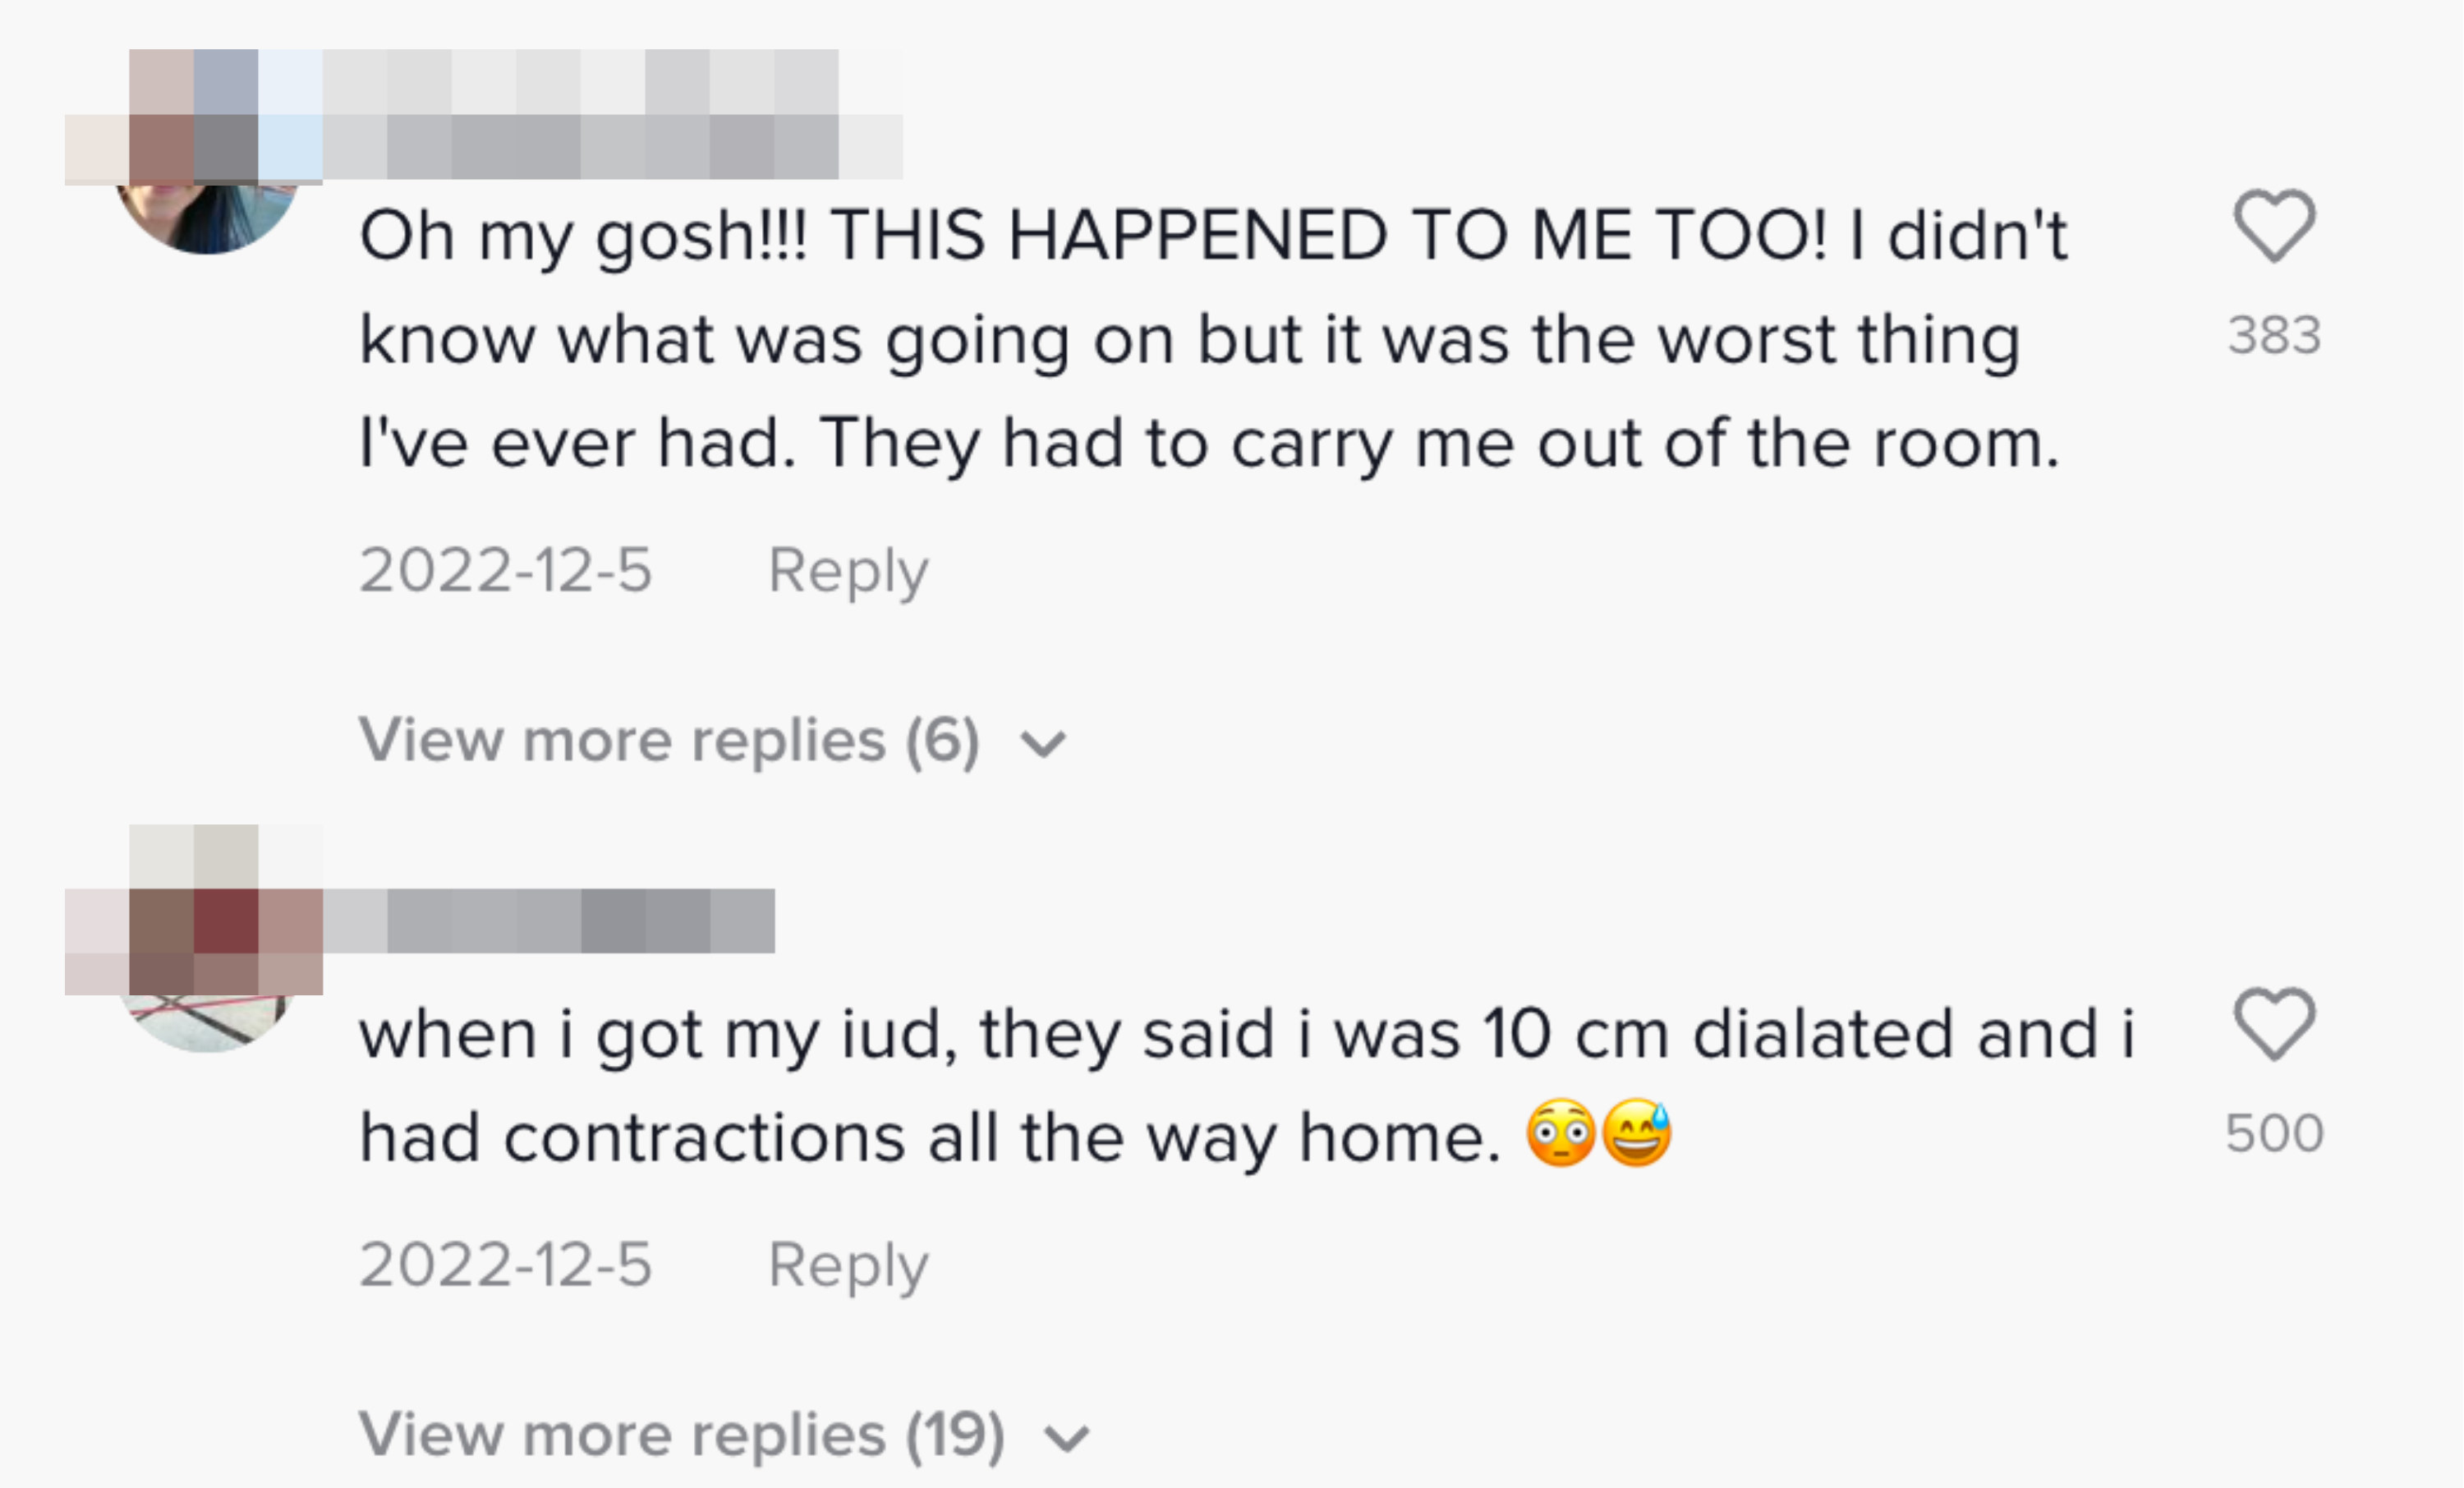 One person said &quot;Oh my gosh!!! THIS HAPPENED TO ME TOO! I didn&#x27;t know what was going on but it was the worst thing I&#x27;ve ever had. They had to carry me out of the room&quot;